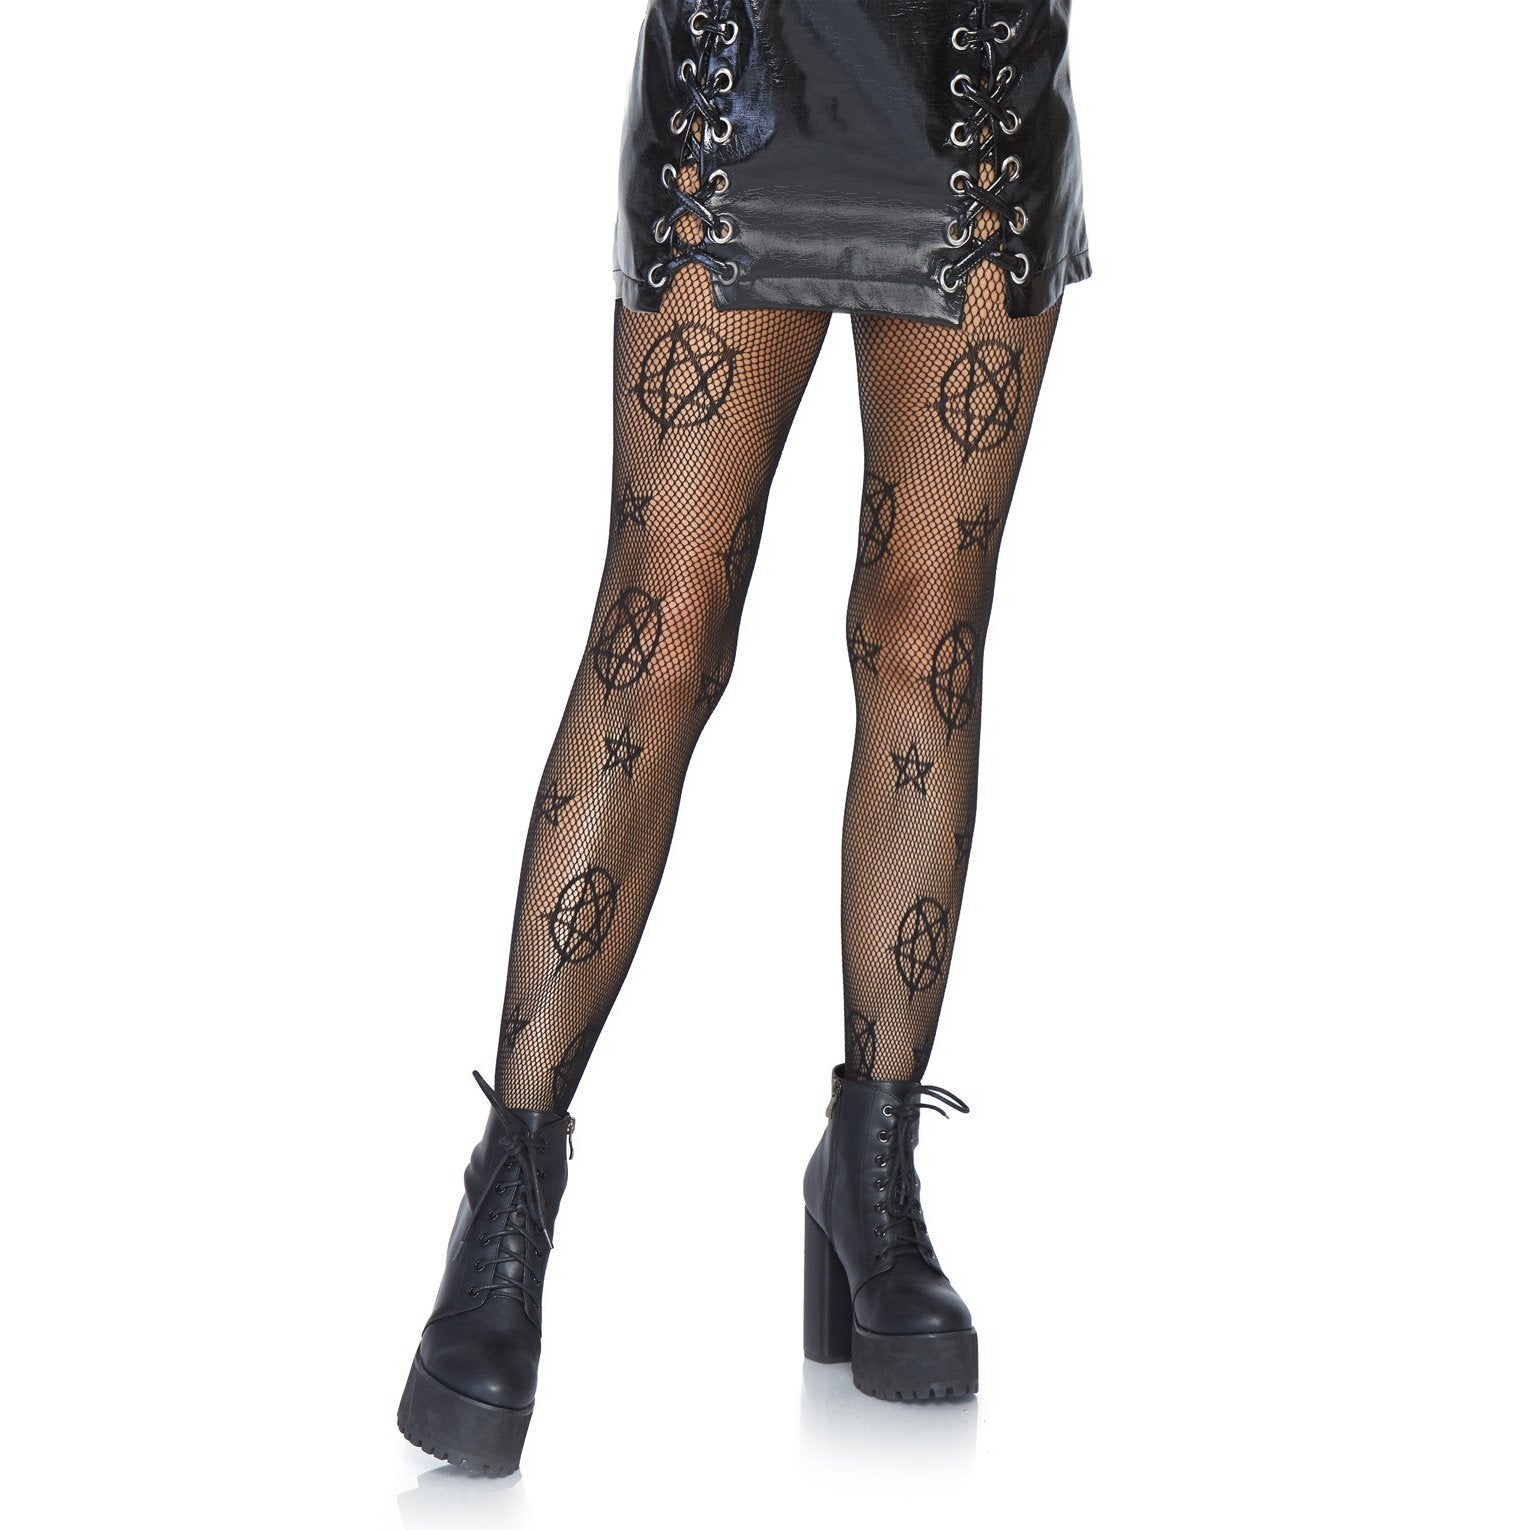 Too Fast | Leg Avenue | Witchy Occult Pentagram Fishnet Stockings